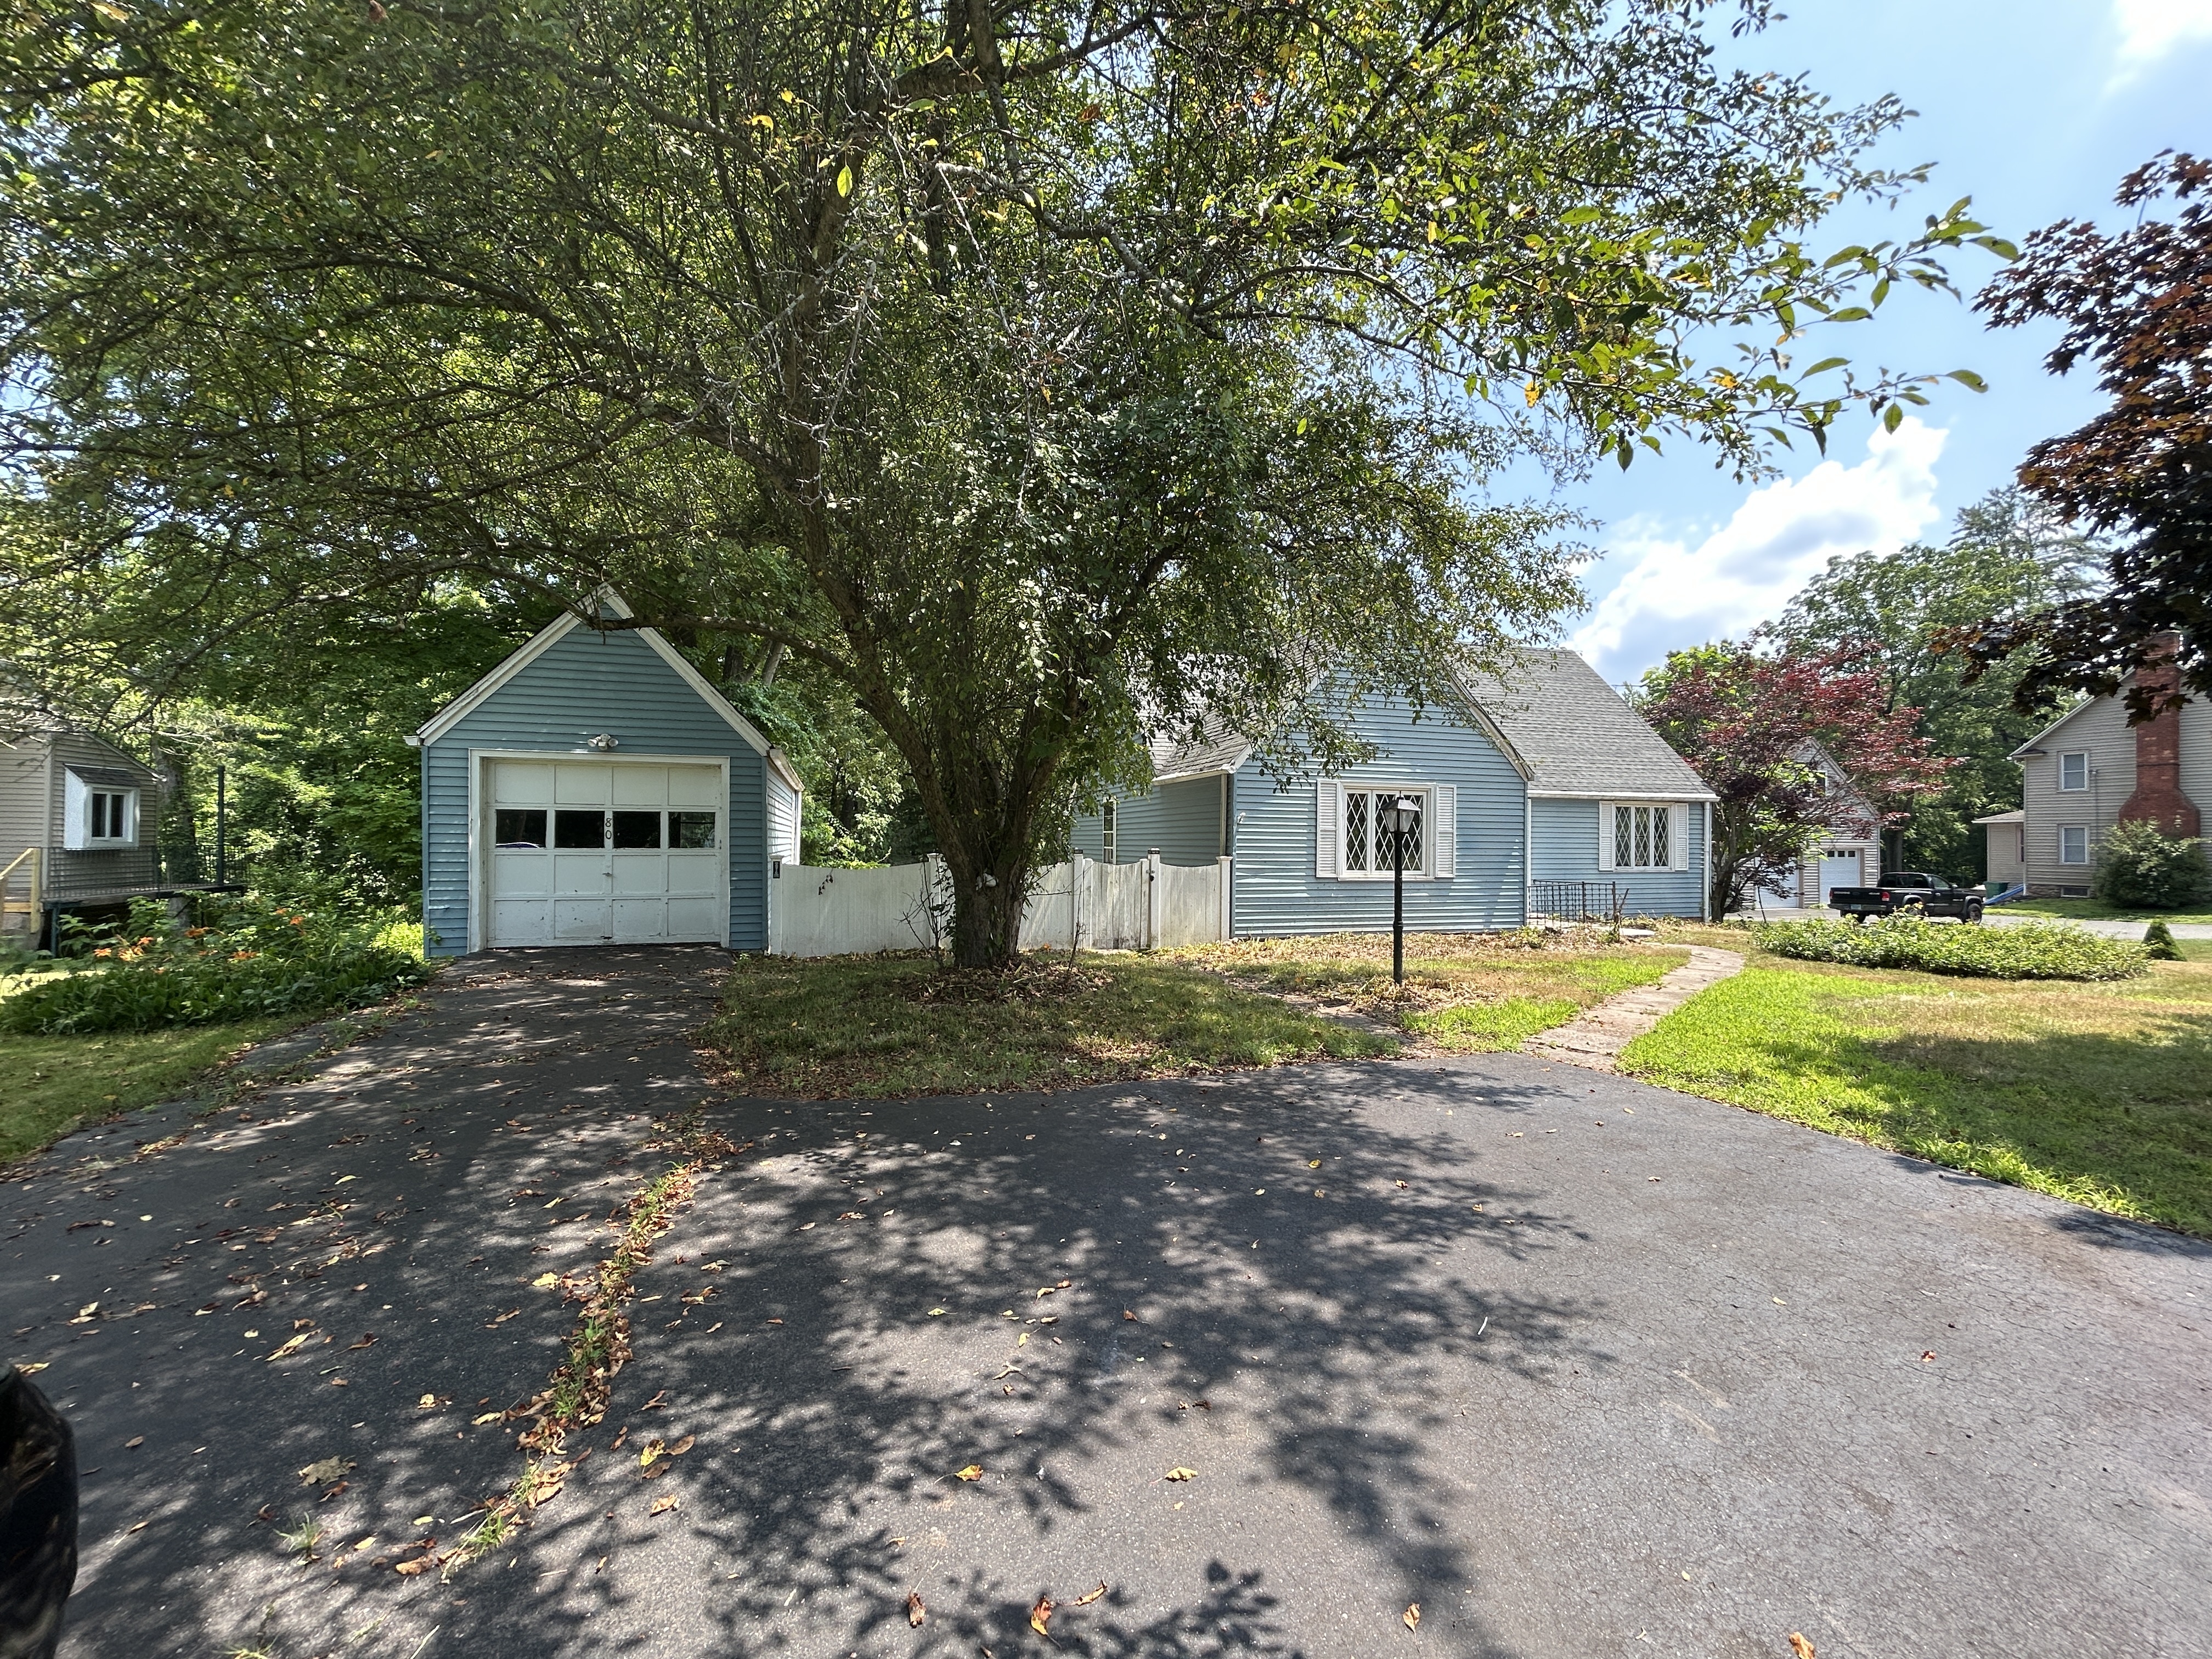 80 Tunxis Ave, Bloomfield, CT 06002 